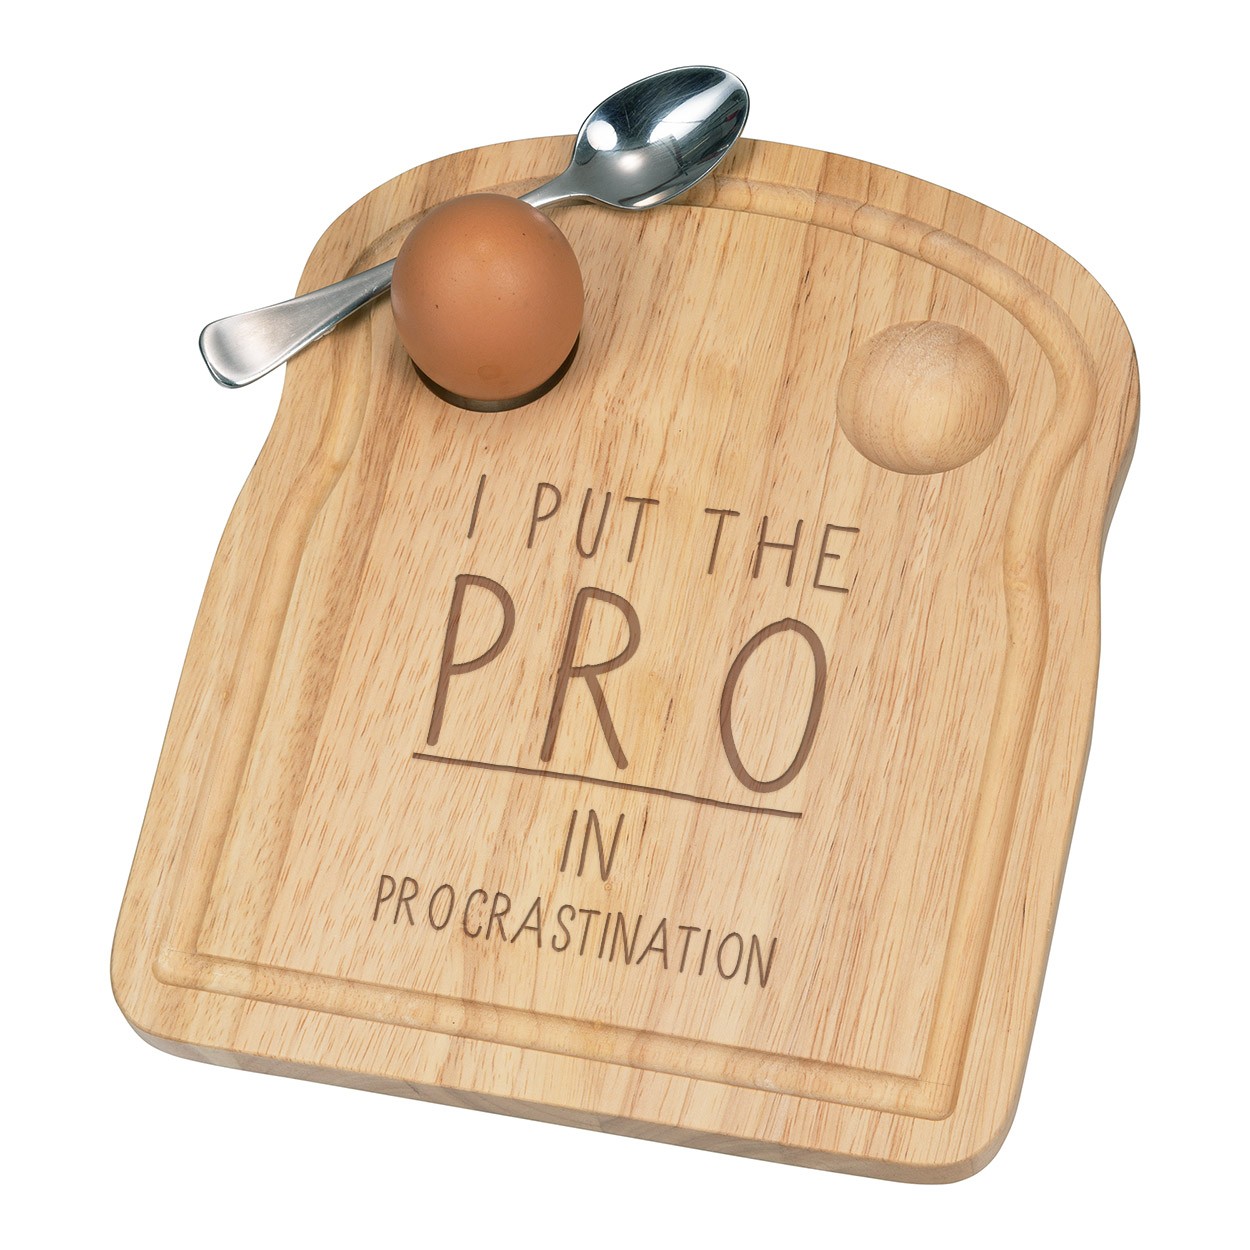 I Put The Pro In Procrastination Breakfast Dippy Egg Cup Board Wooden